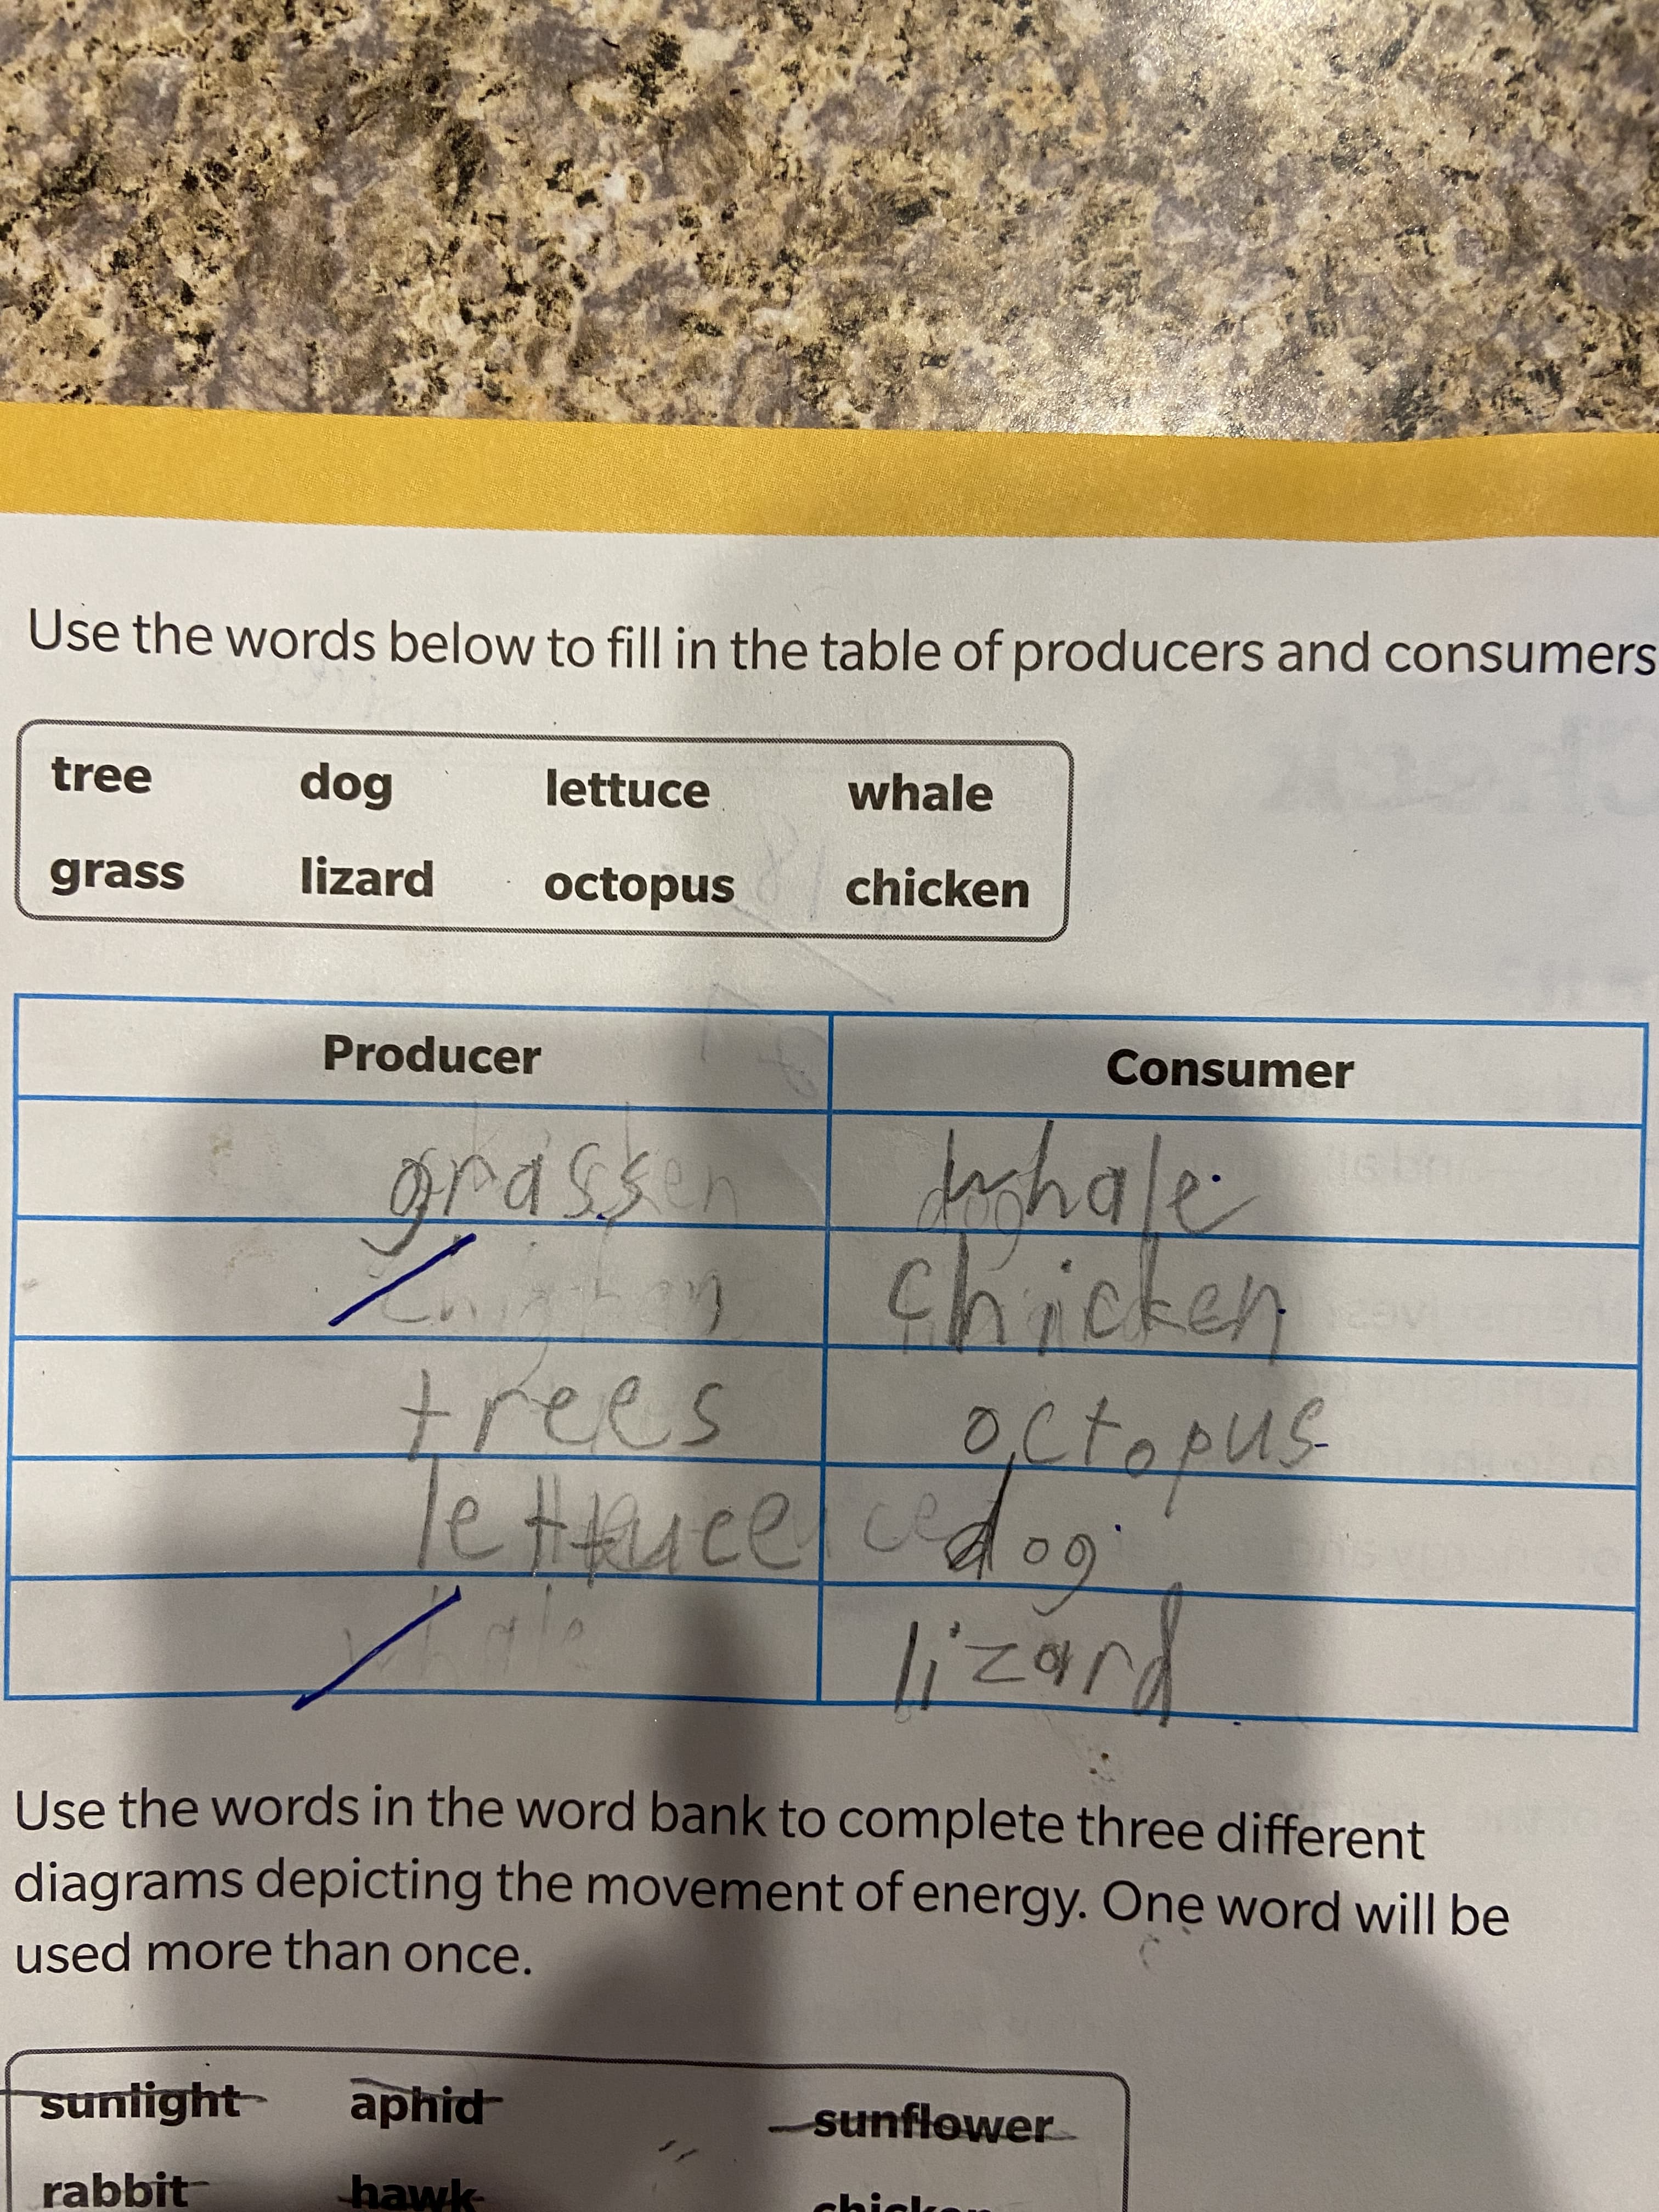 Use the words below to fill in the table of producers and consumers
tree
whale
bop
lizard
lettuce
grass
octopus
chicken
Producer
Consumer
Ichale
byn
chicken
el
कमर्षण्य बि
こoz.l
Use the words in the word bank to complete three different
diagrams depicting the movement of energy. One word will be
used more than once.
suntight
aphid
sunflower
rabbit
hawk
